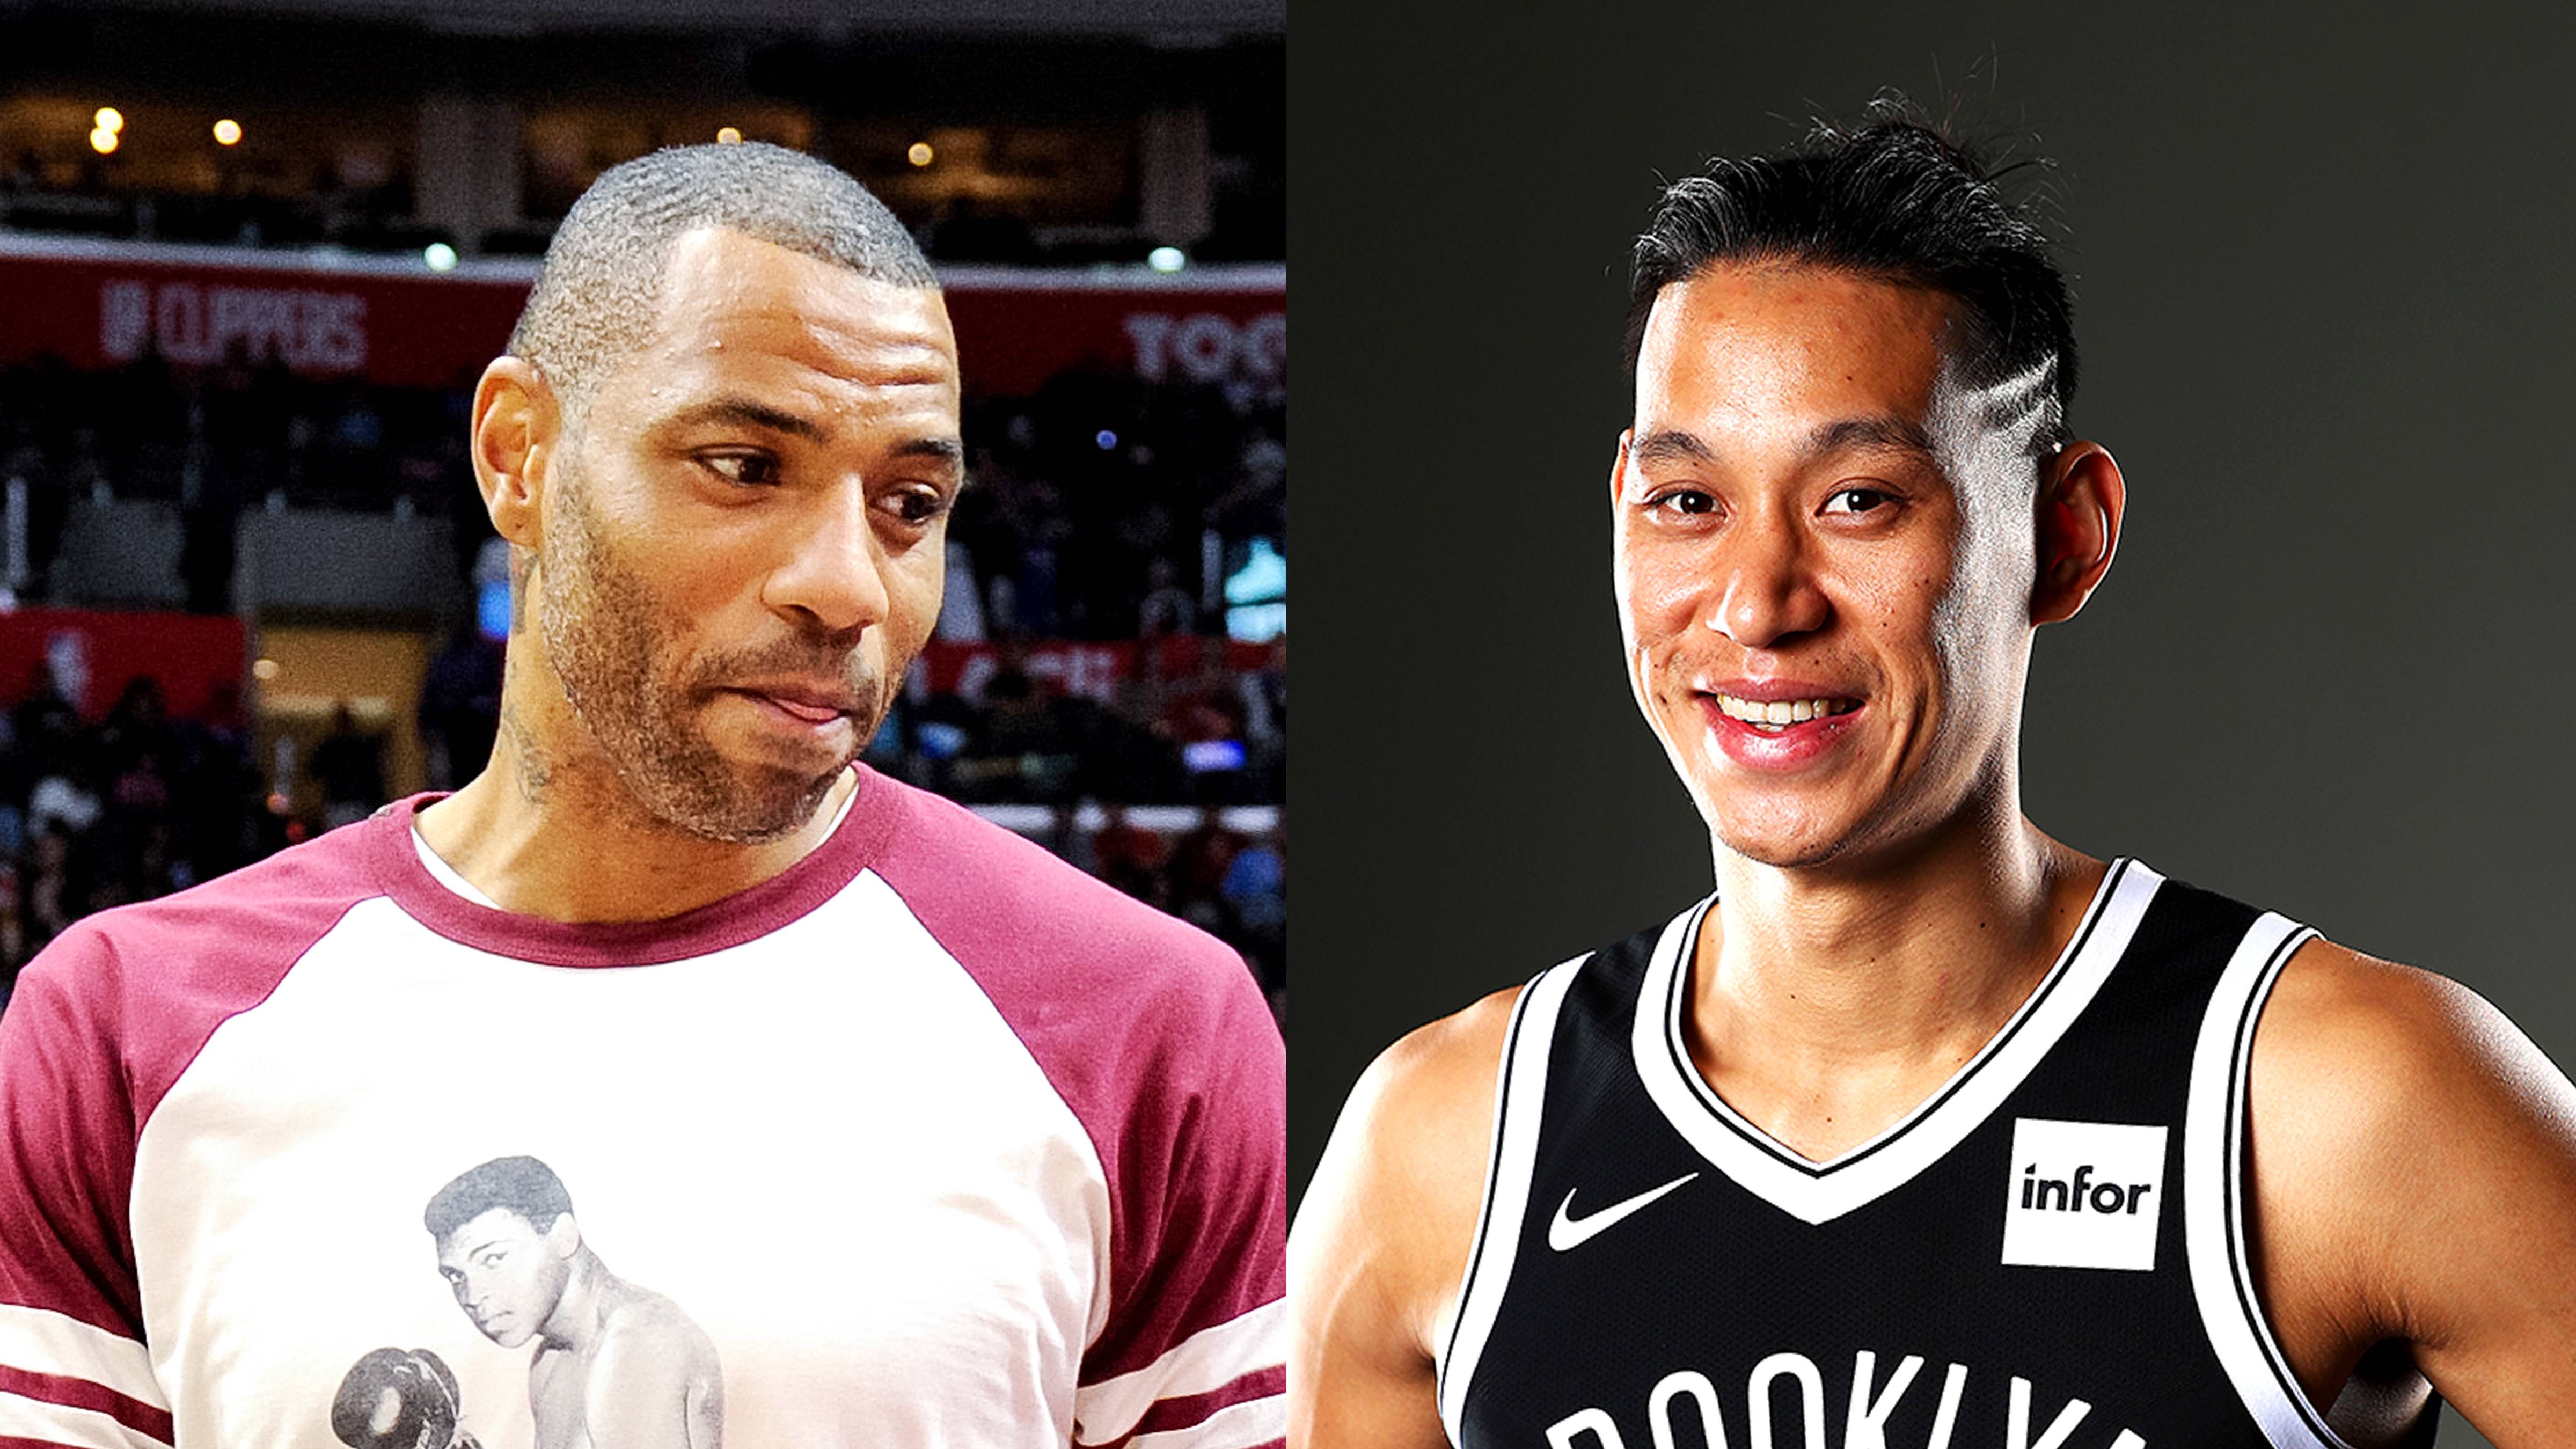 Jeremy Lin's dreadlocks have led to all kinds of comments — even